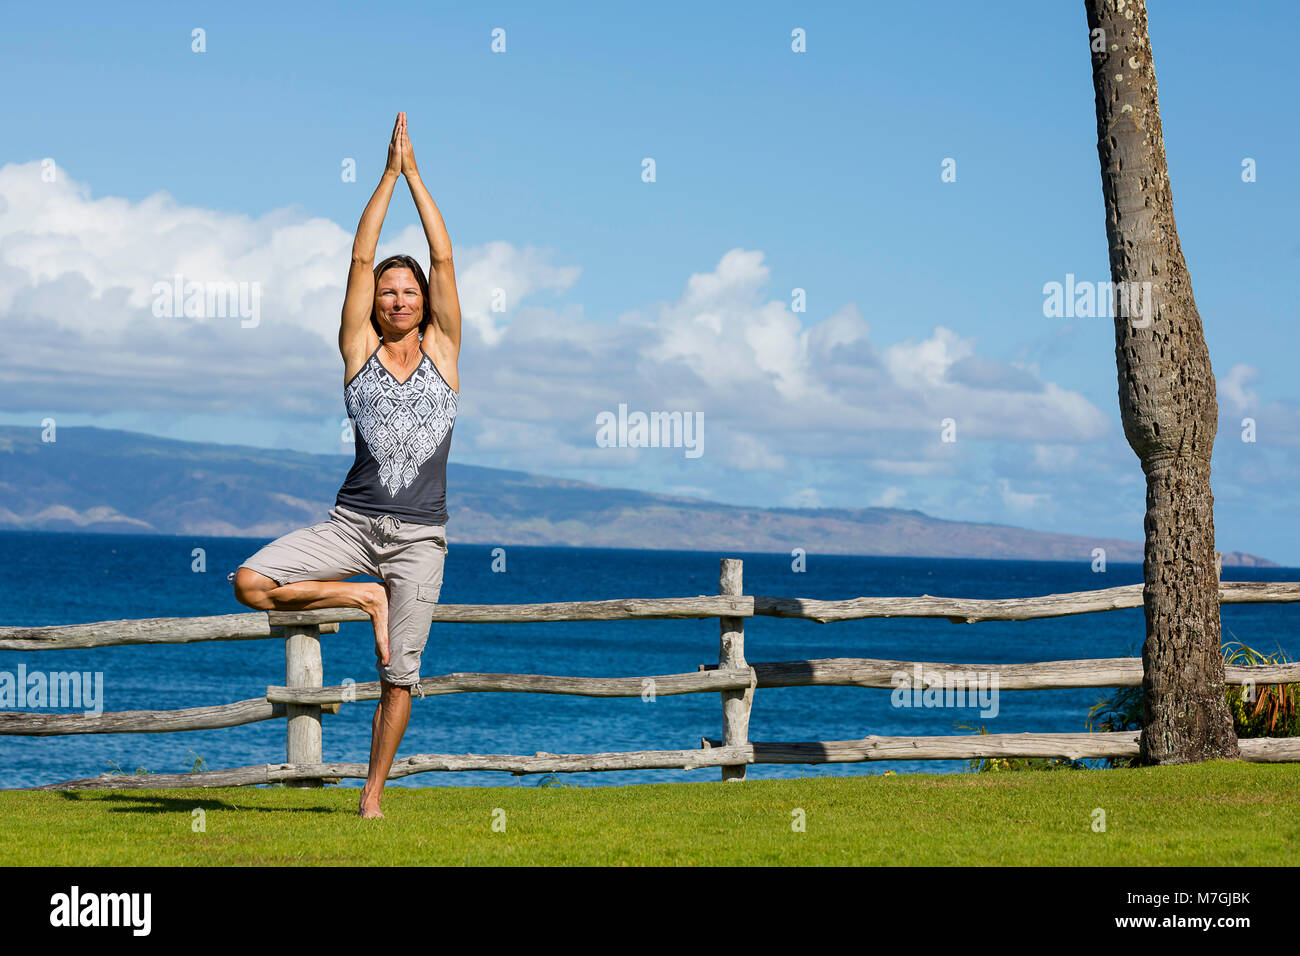 A woman (MR) in front of the ocean in a yoga position, Kapalua Bay, Maui, Hawaii, USA. Stock Photo